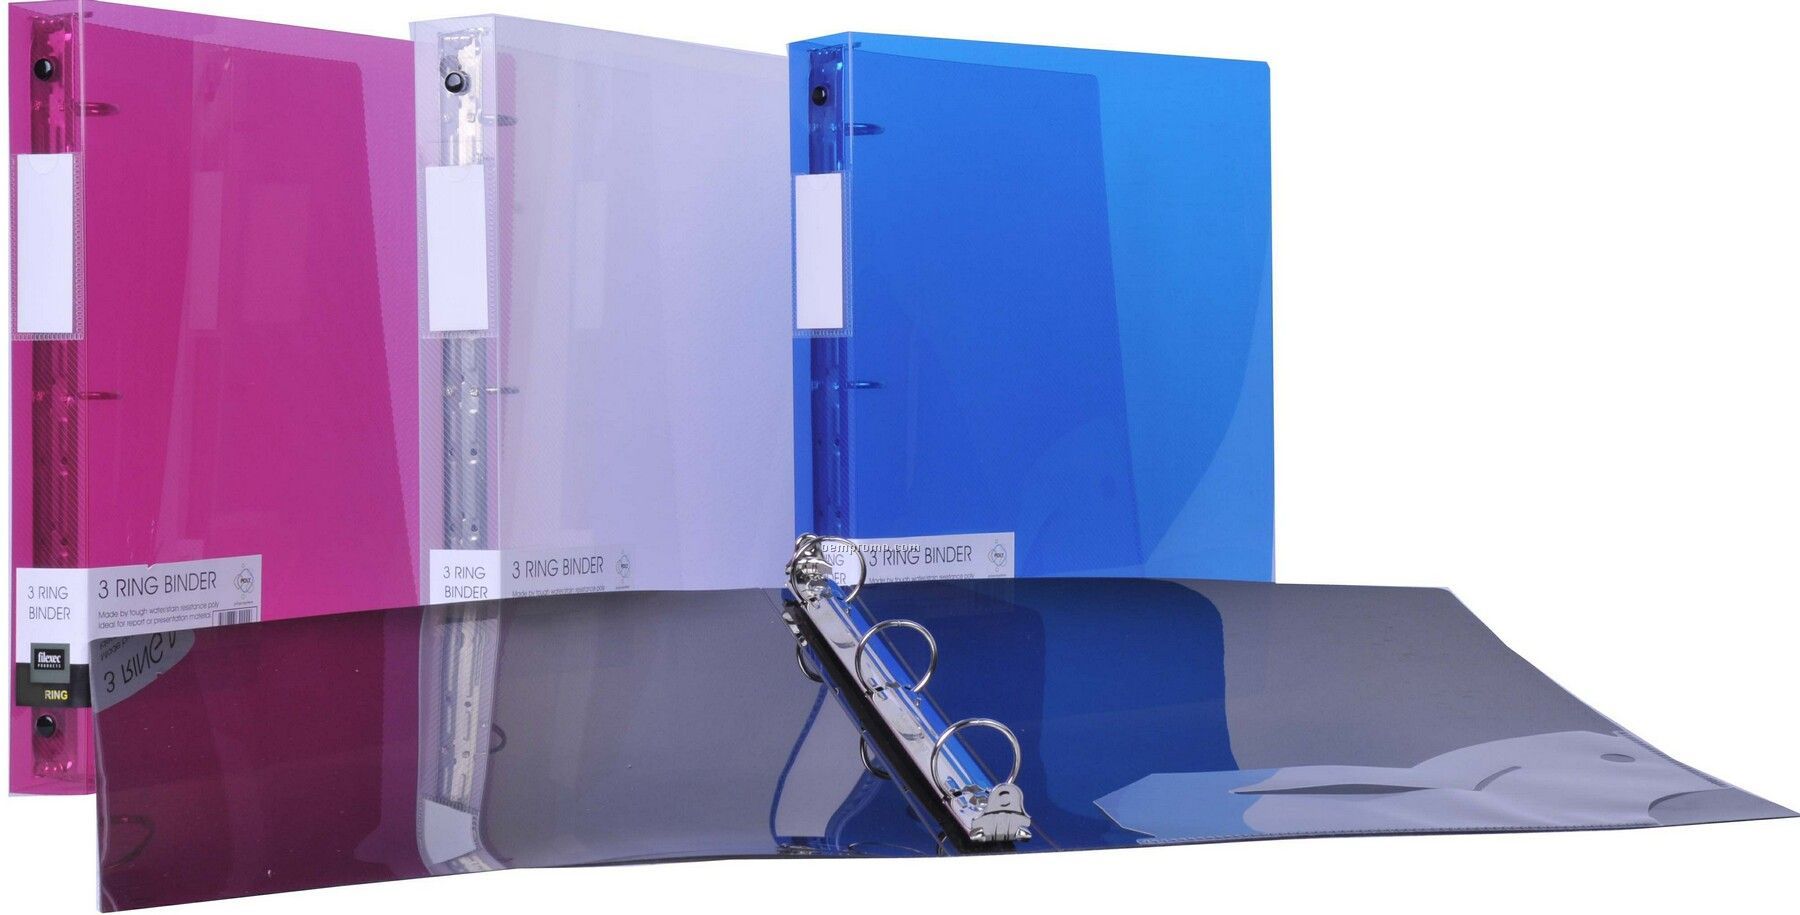 Translucent Blue 3-ring Binder With 1" Ring